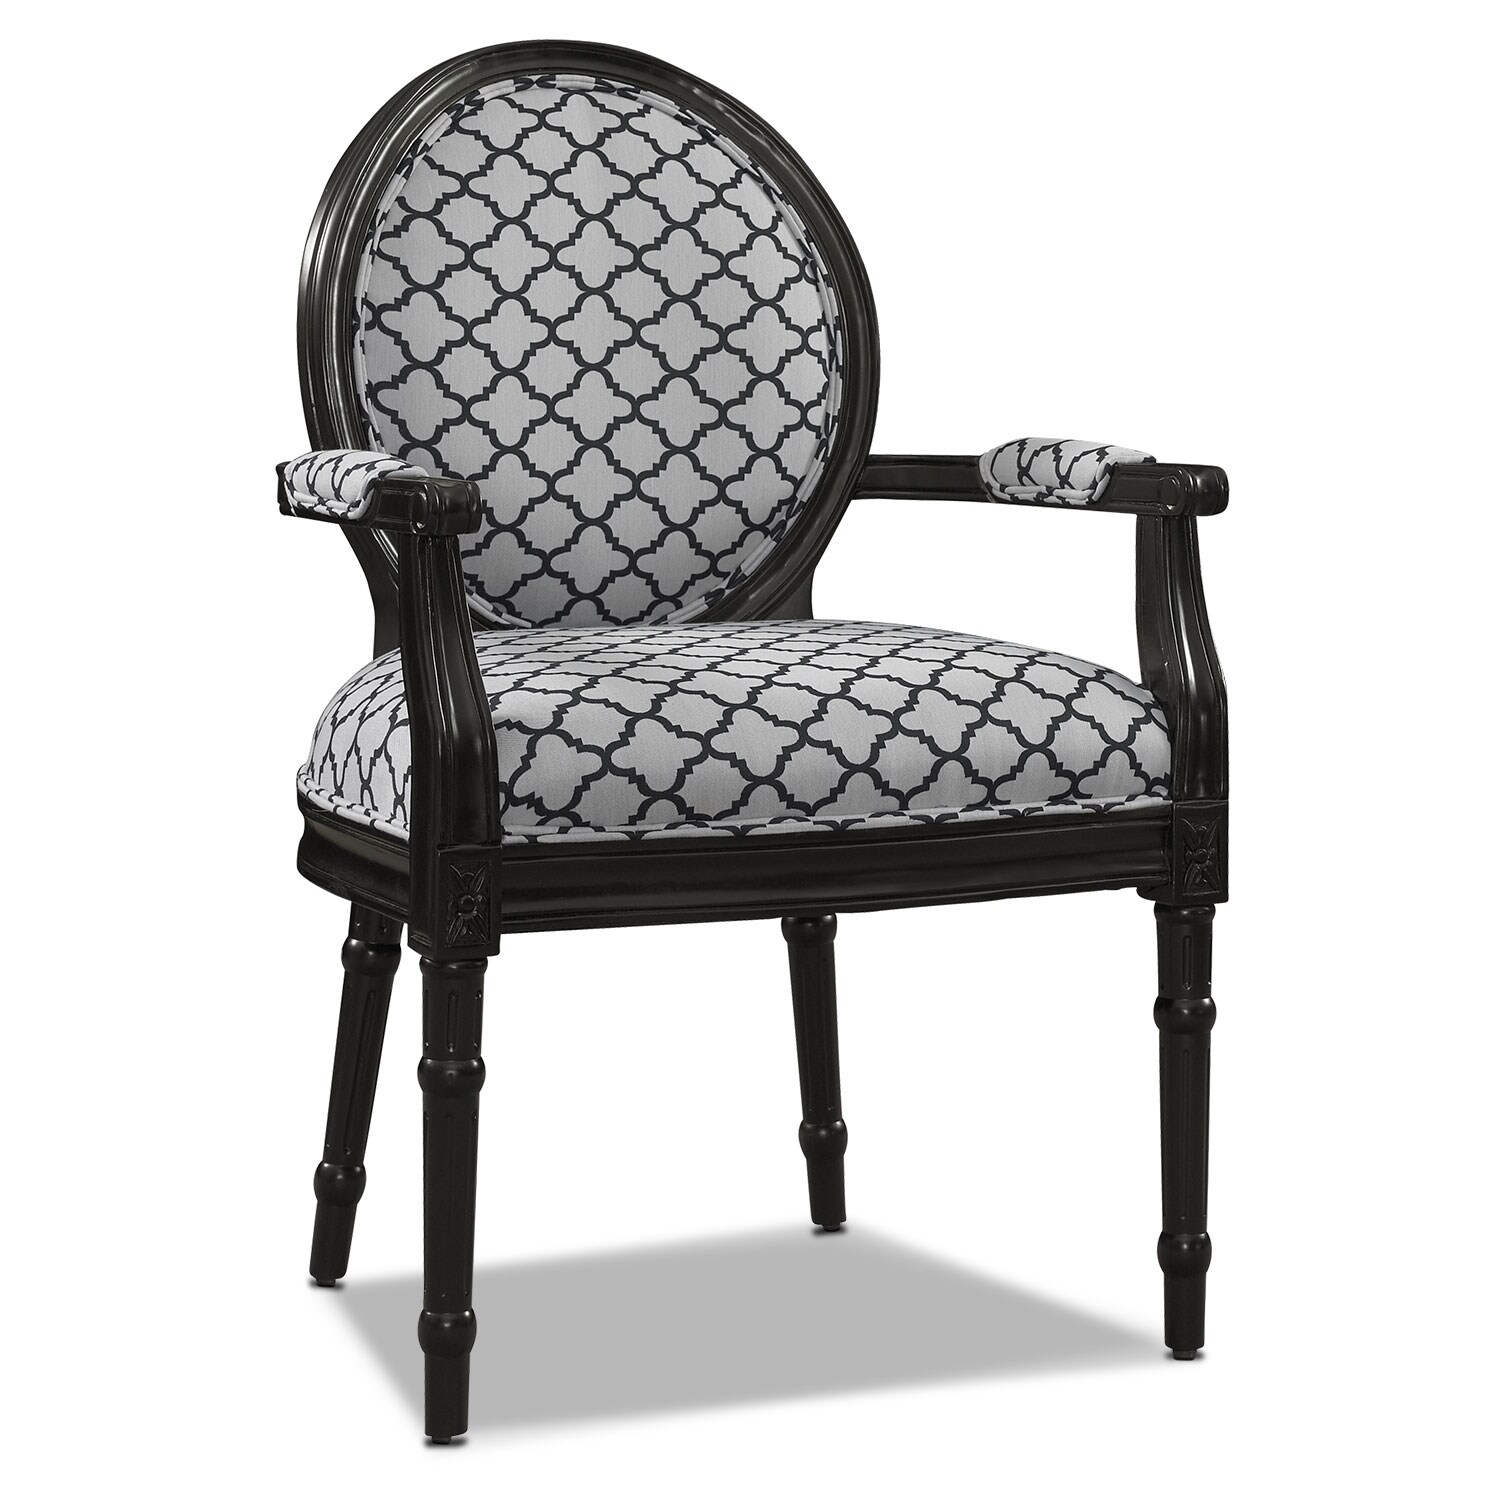 Myra Accent Chair Black and White Value City Furniture